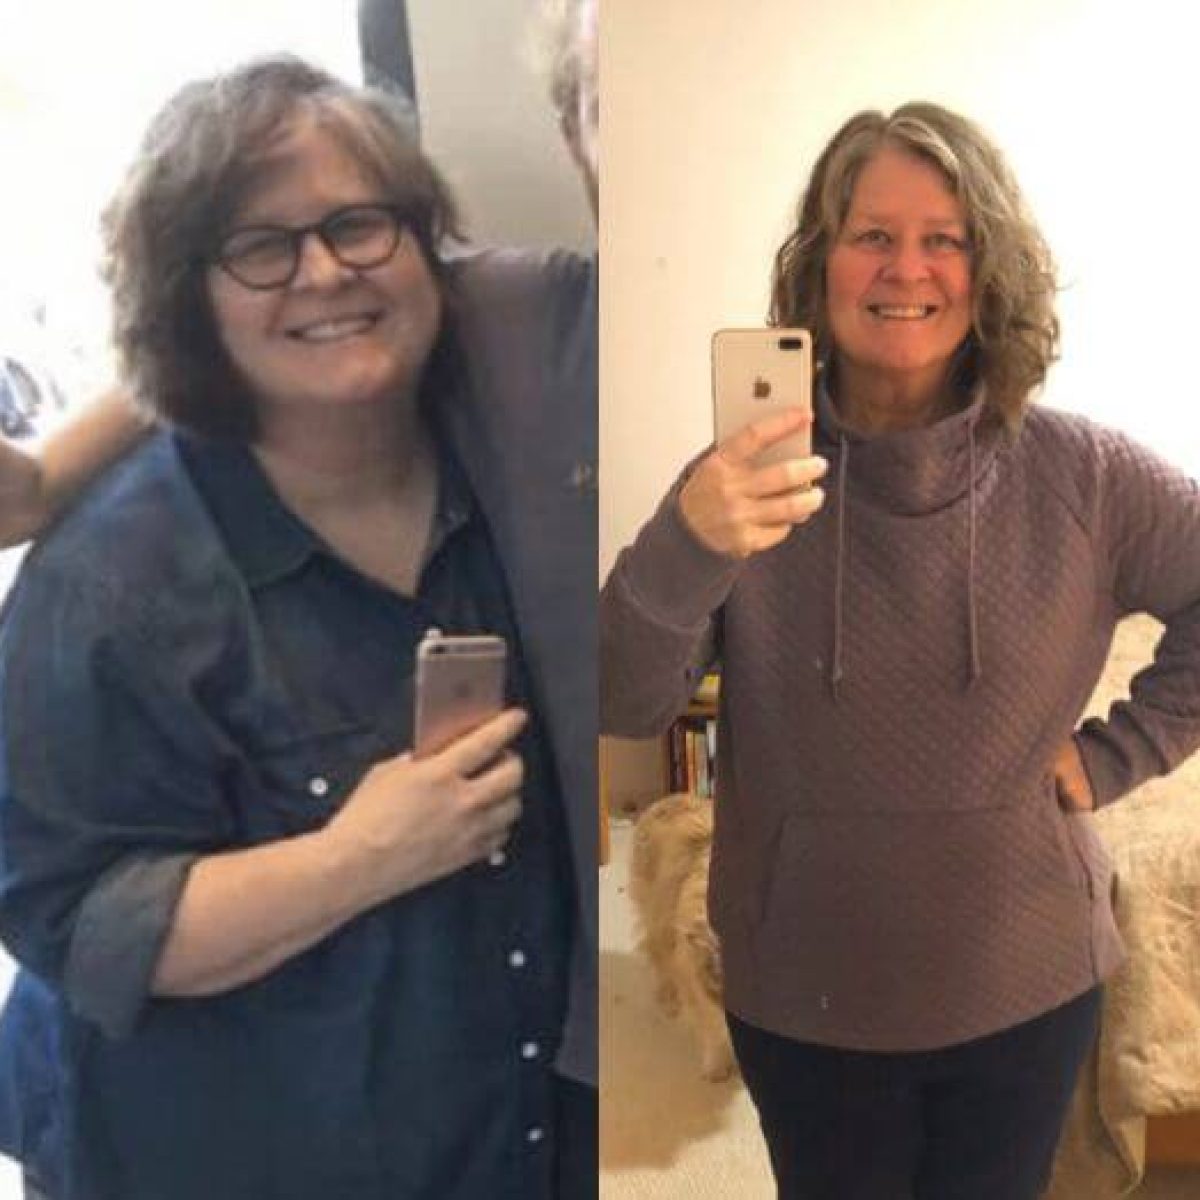 Two pictures of a woman before and after her weight loss.